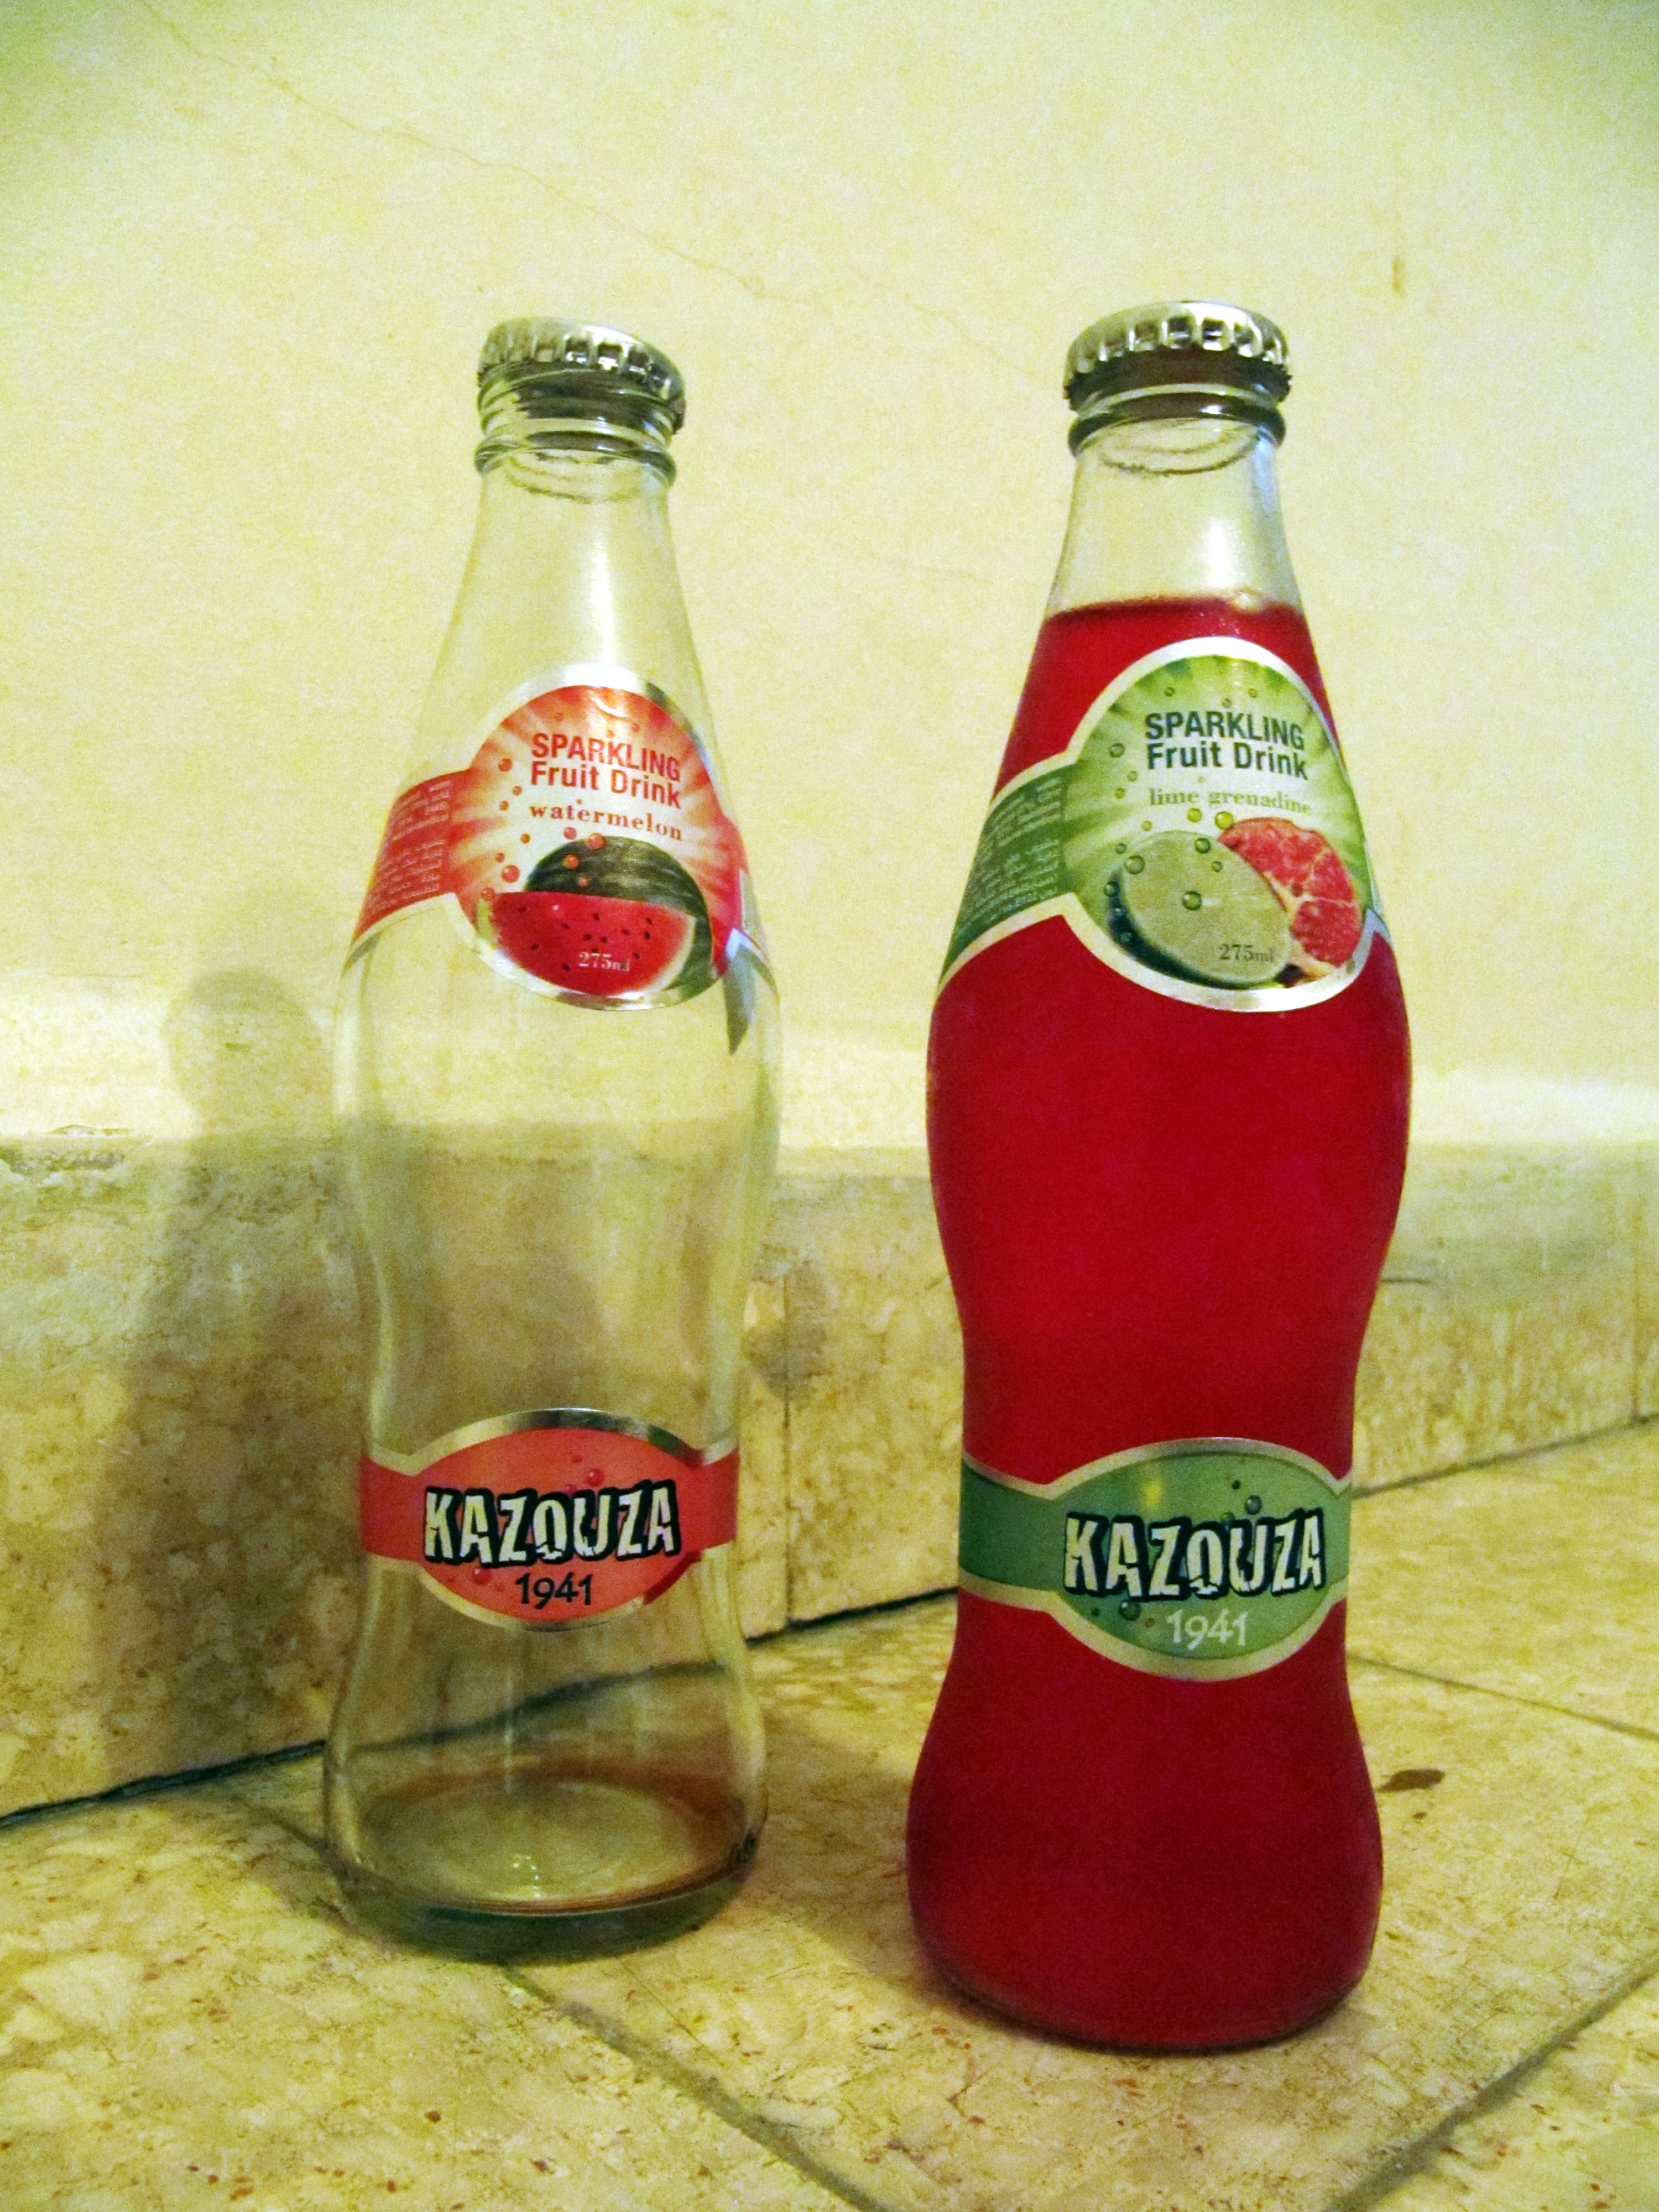 KAZOUZA – The new bubbly drink in town? | The Identity Chef